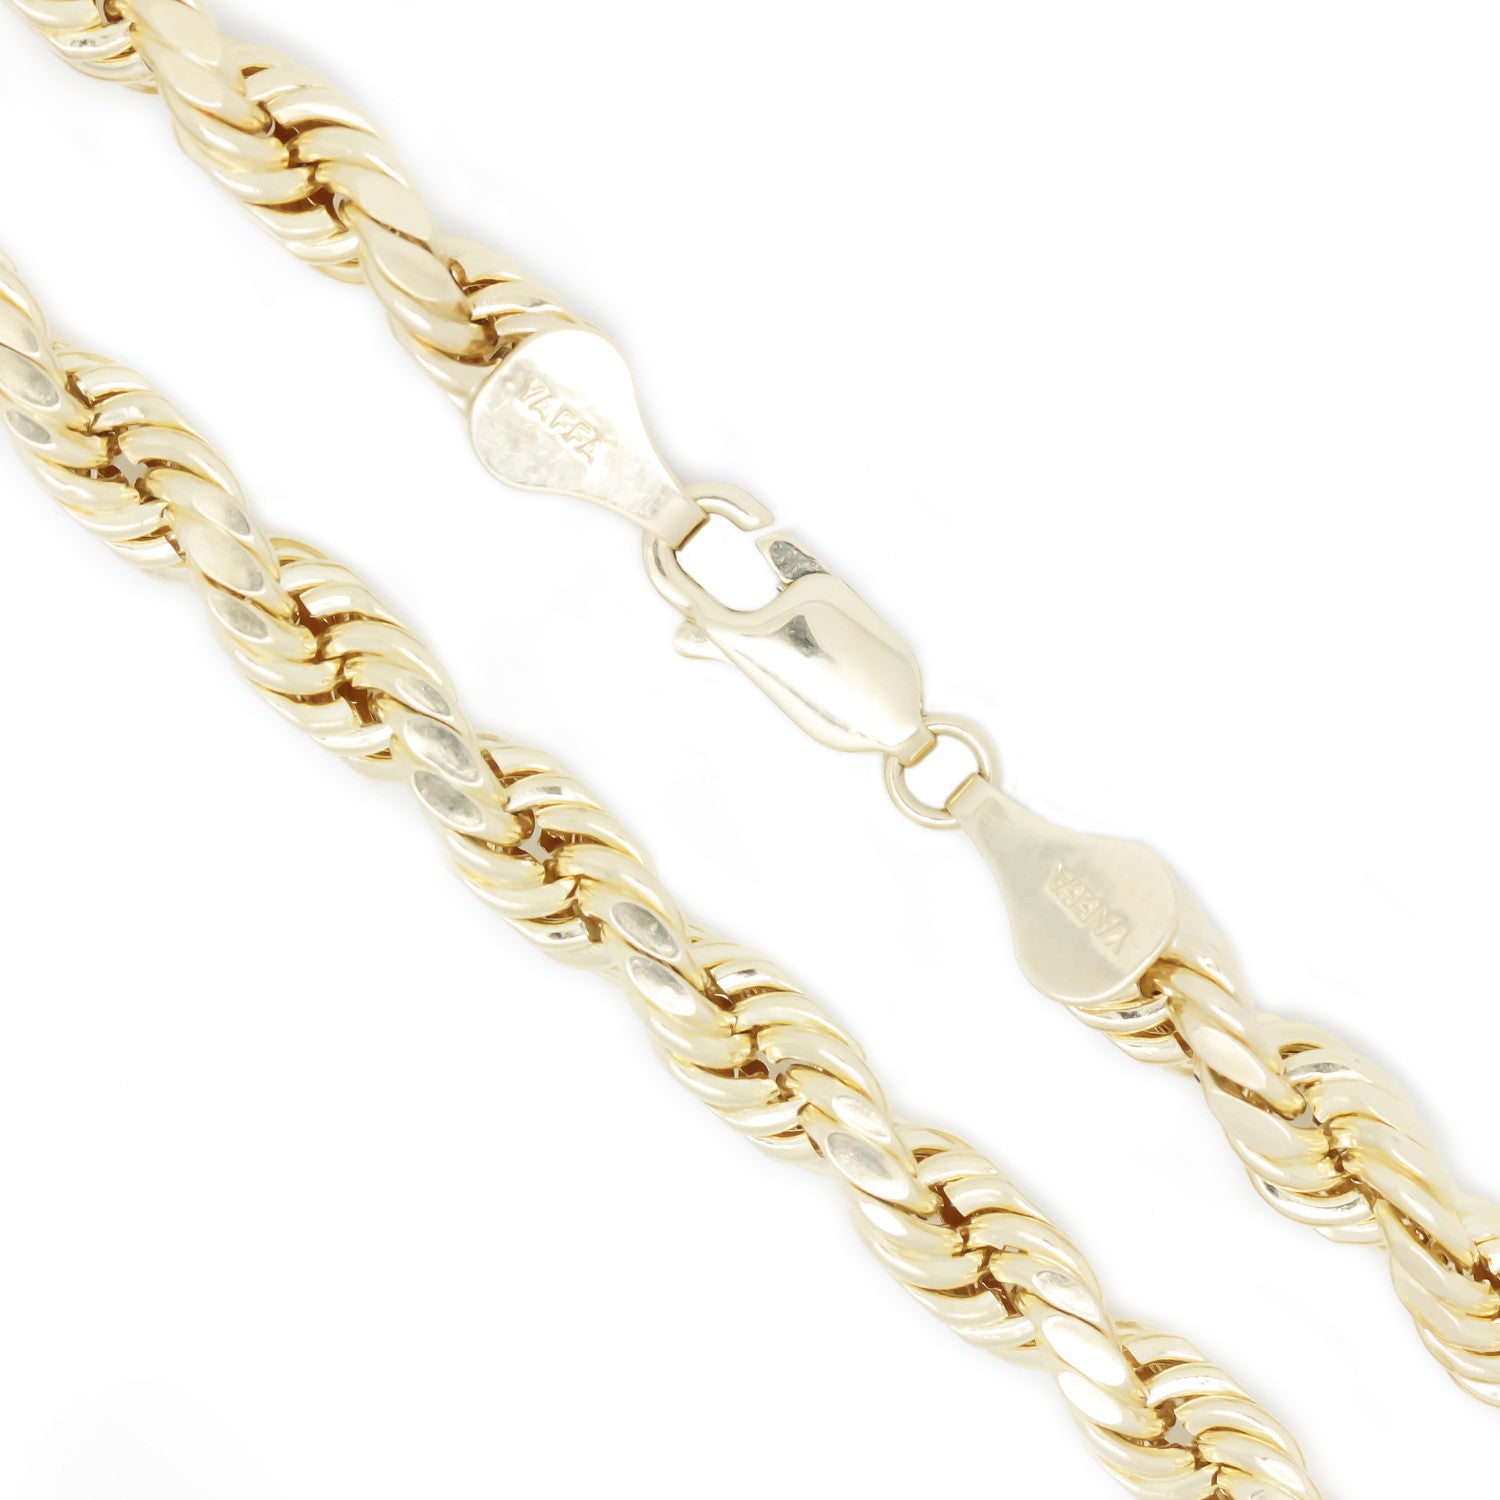 10K Yellow Gold 1.75 mm Rope Chain Necklace 26 Inches